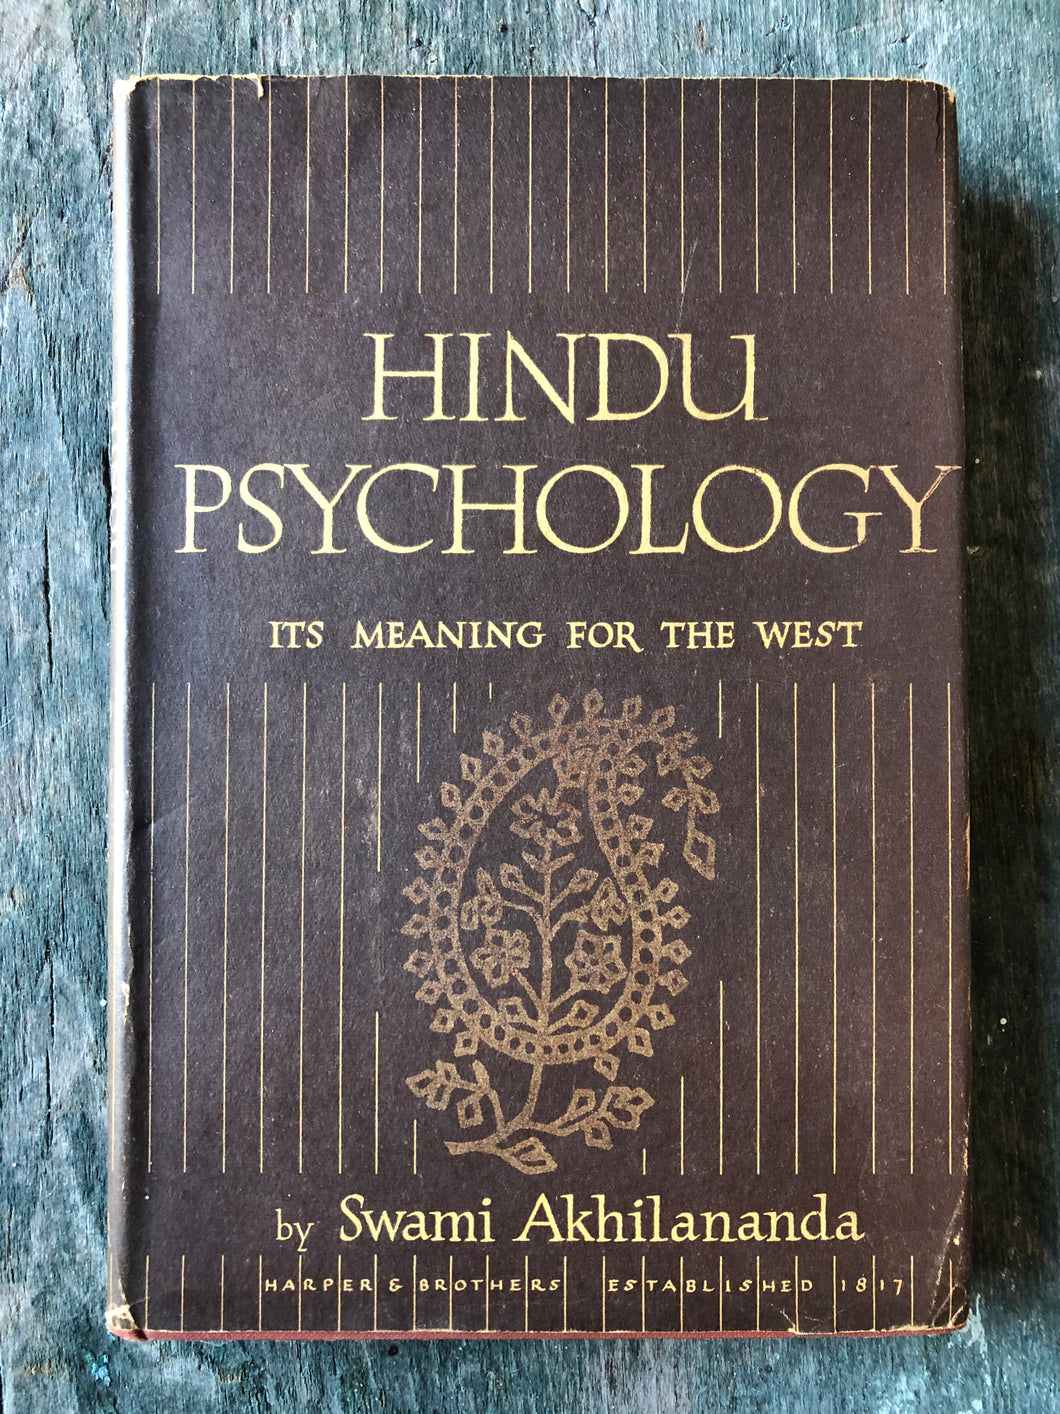 Hindu Psychology: Its Meaning for the West by Swami Akhilananda